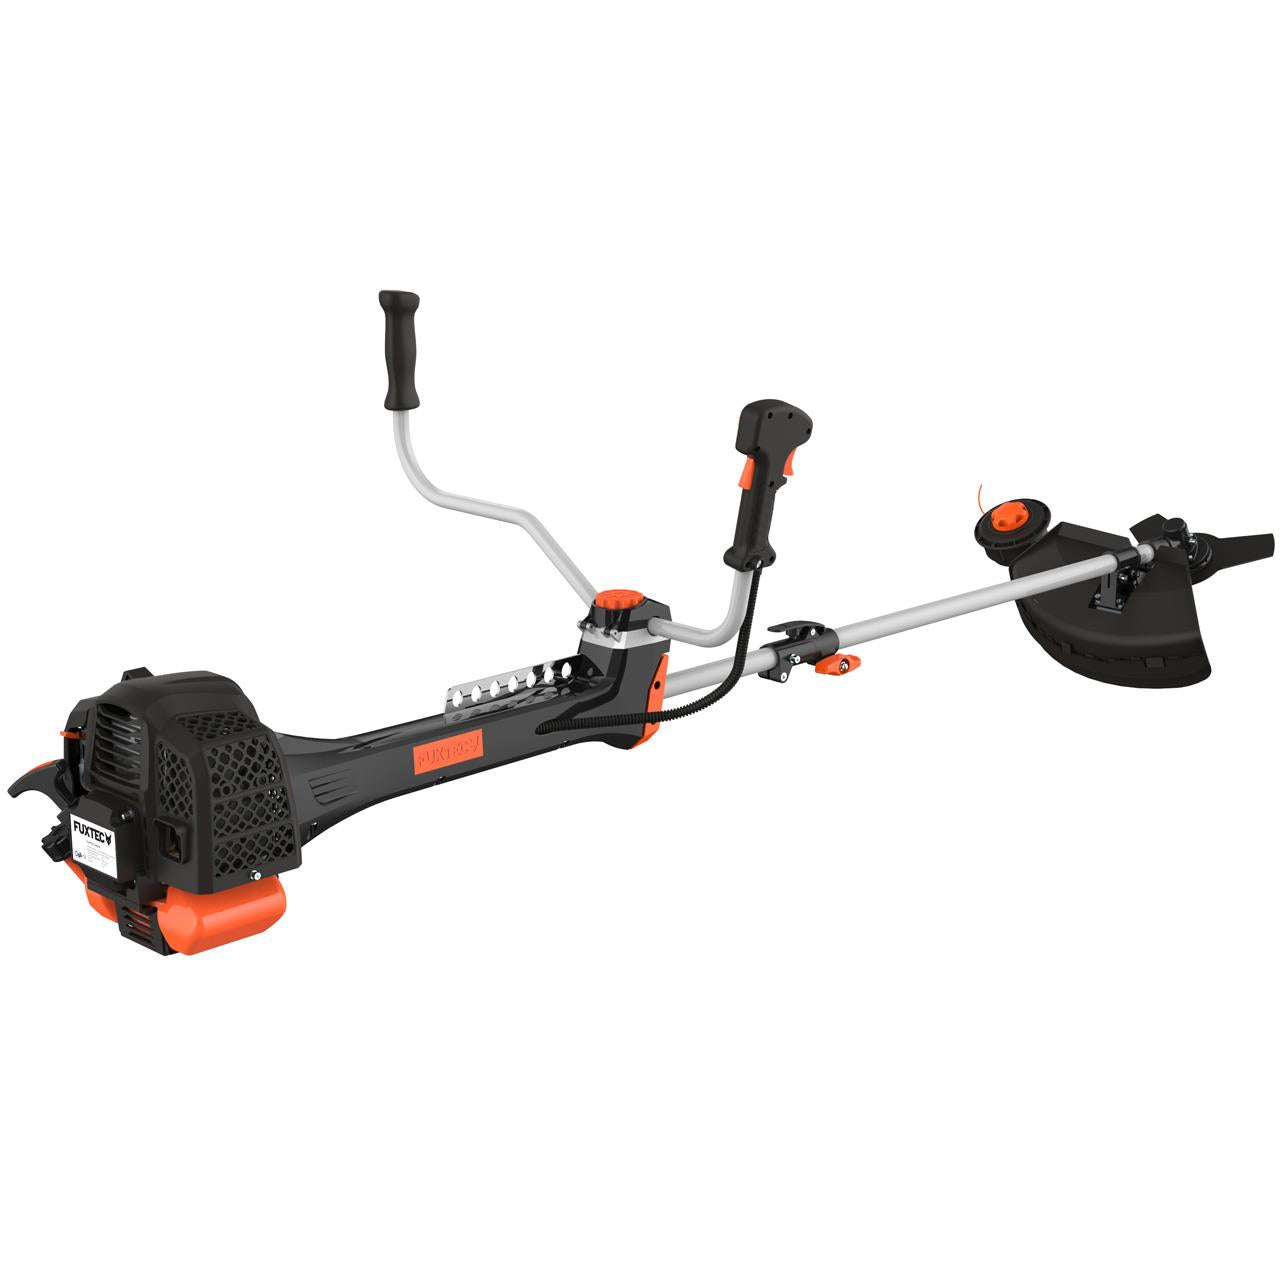 FUXTEC Professional Petrol 2in1 Power Brush Cutter / Grass Trimmer FX-PS152